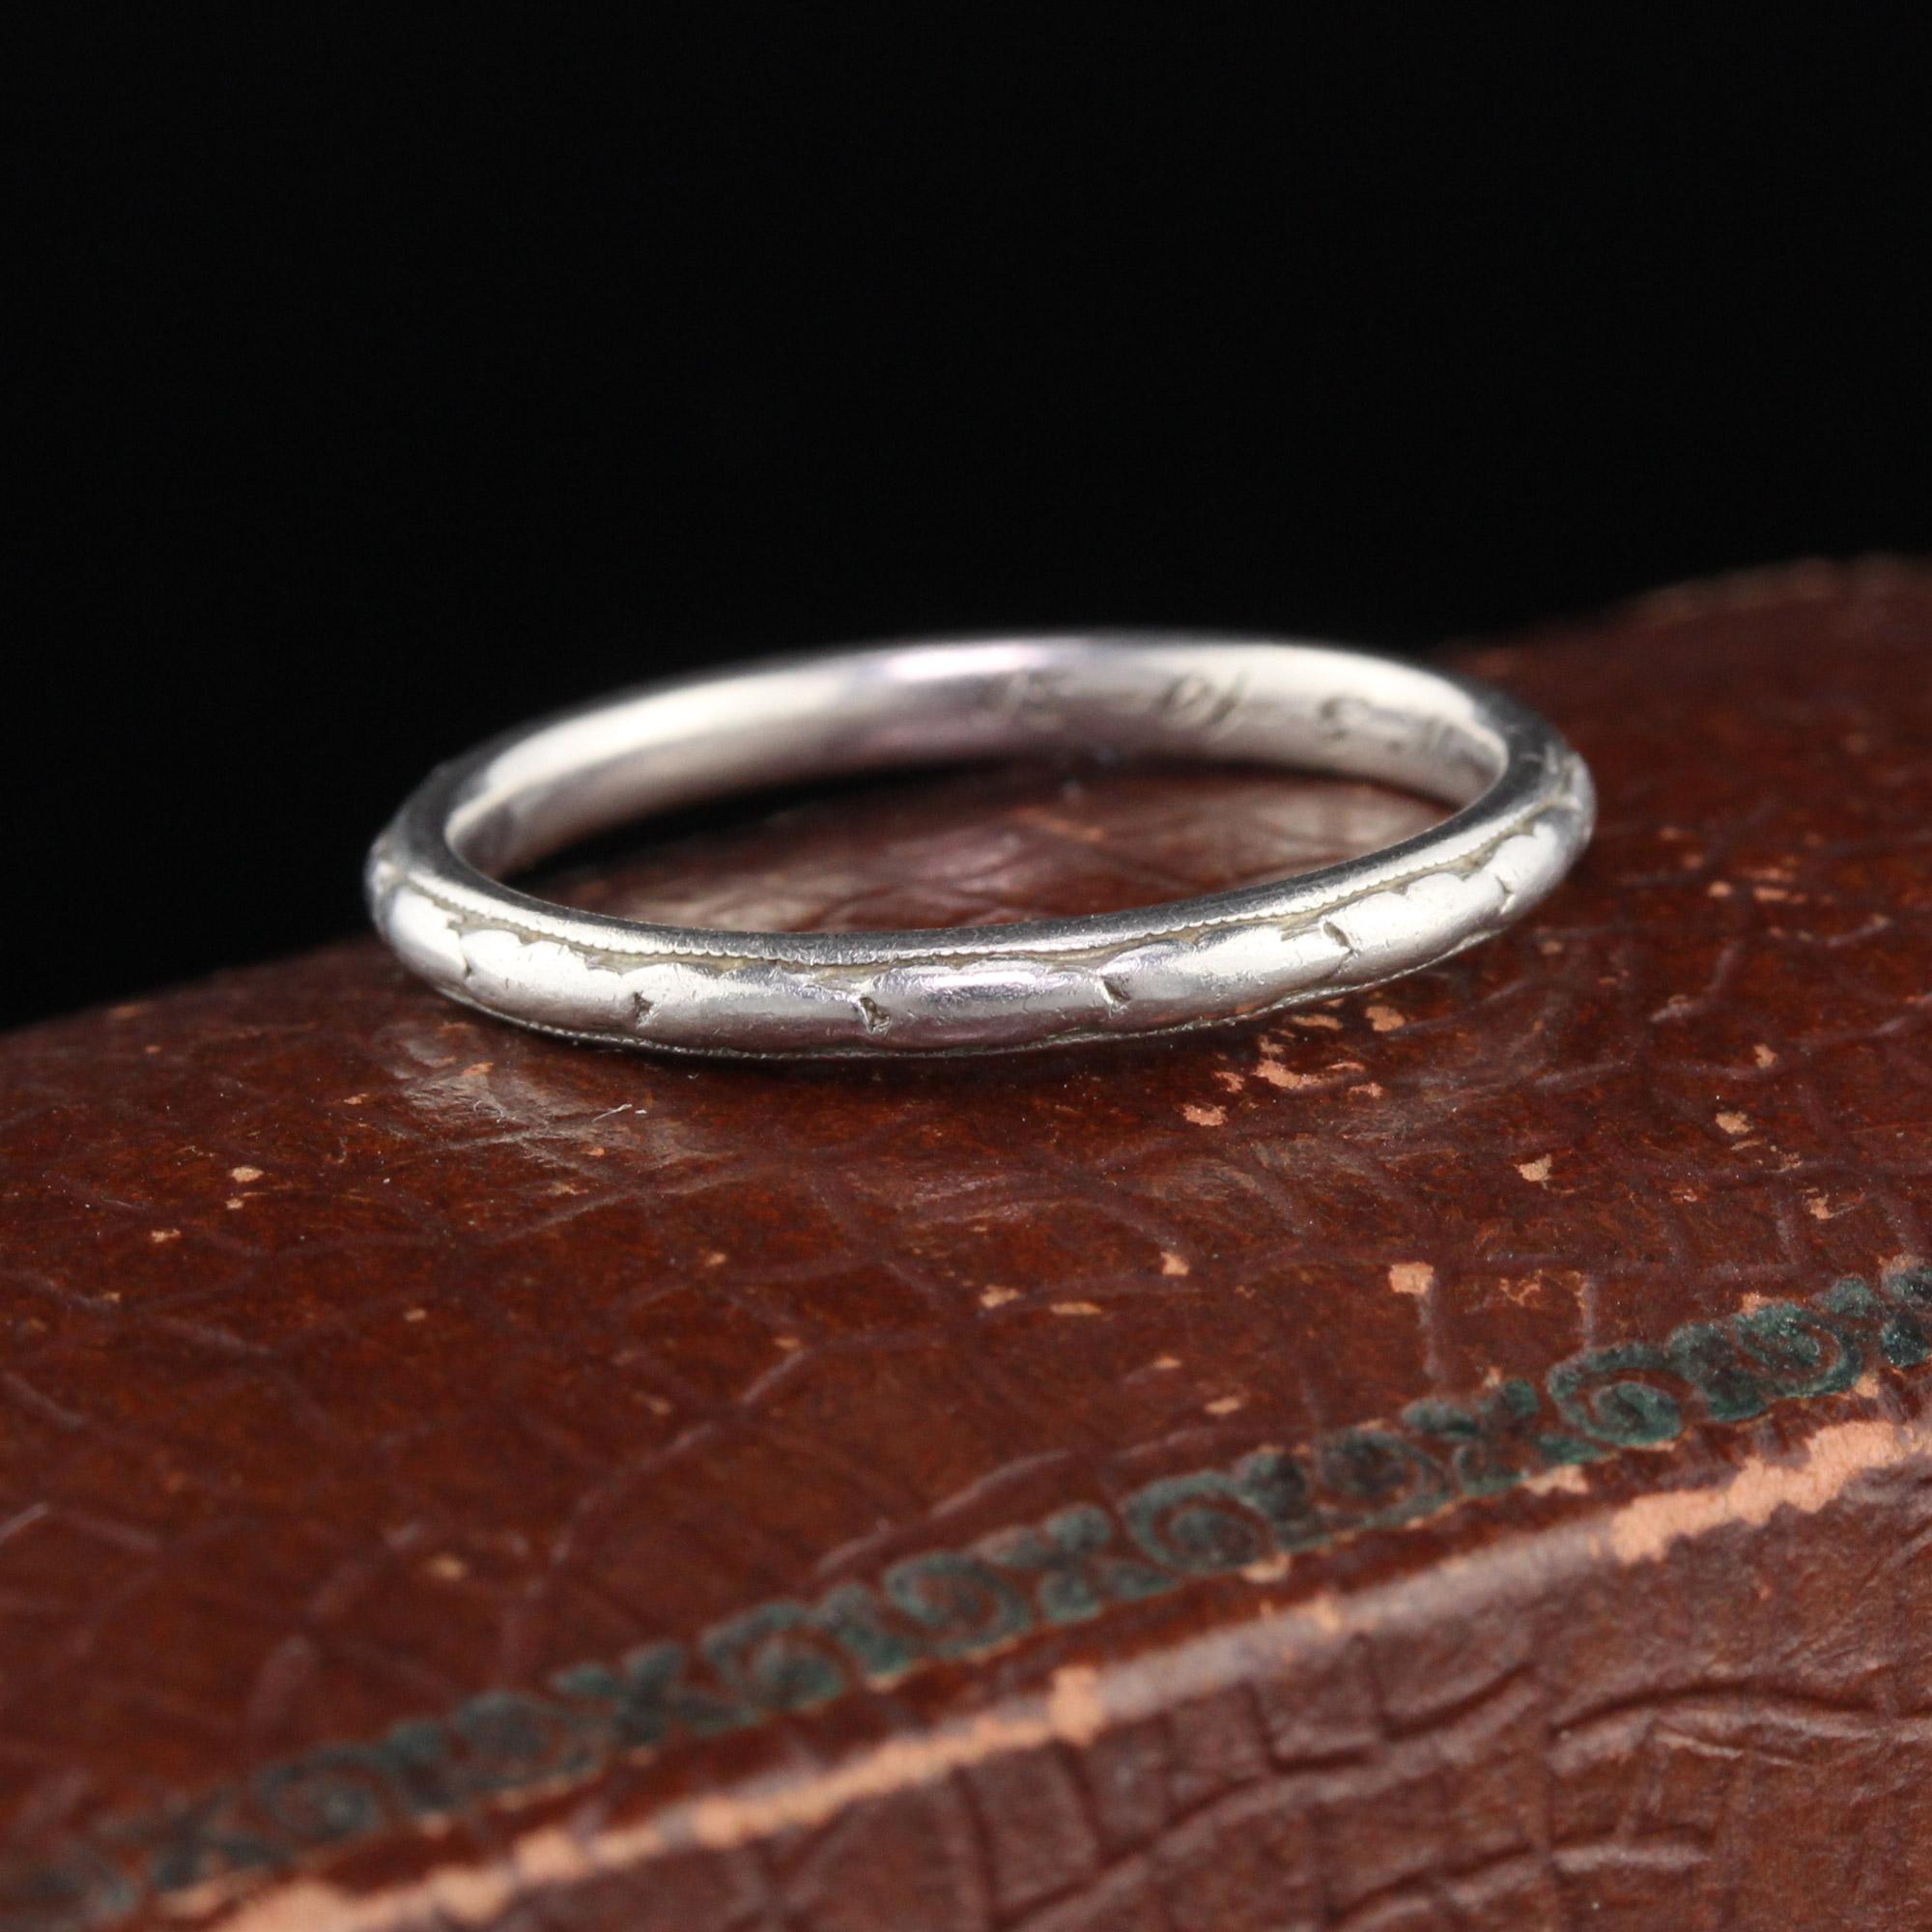 Circa 1930 - Art deco platinum Orange Blossom wedding band engravings all the way around.

#R0212

Metal: Platinum

Weight: 3.3 Grams

Ring Size: 6.5 (sizable)

This ring can be sized for a $30 fee!

*Please note that we cannot accept returns on